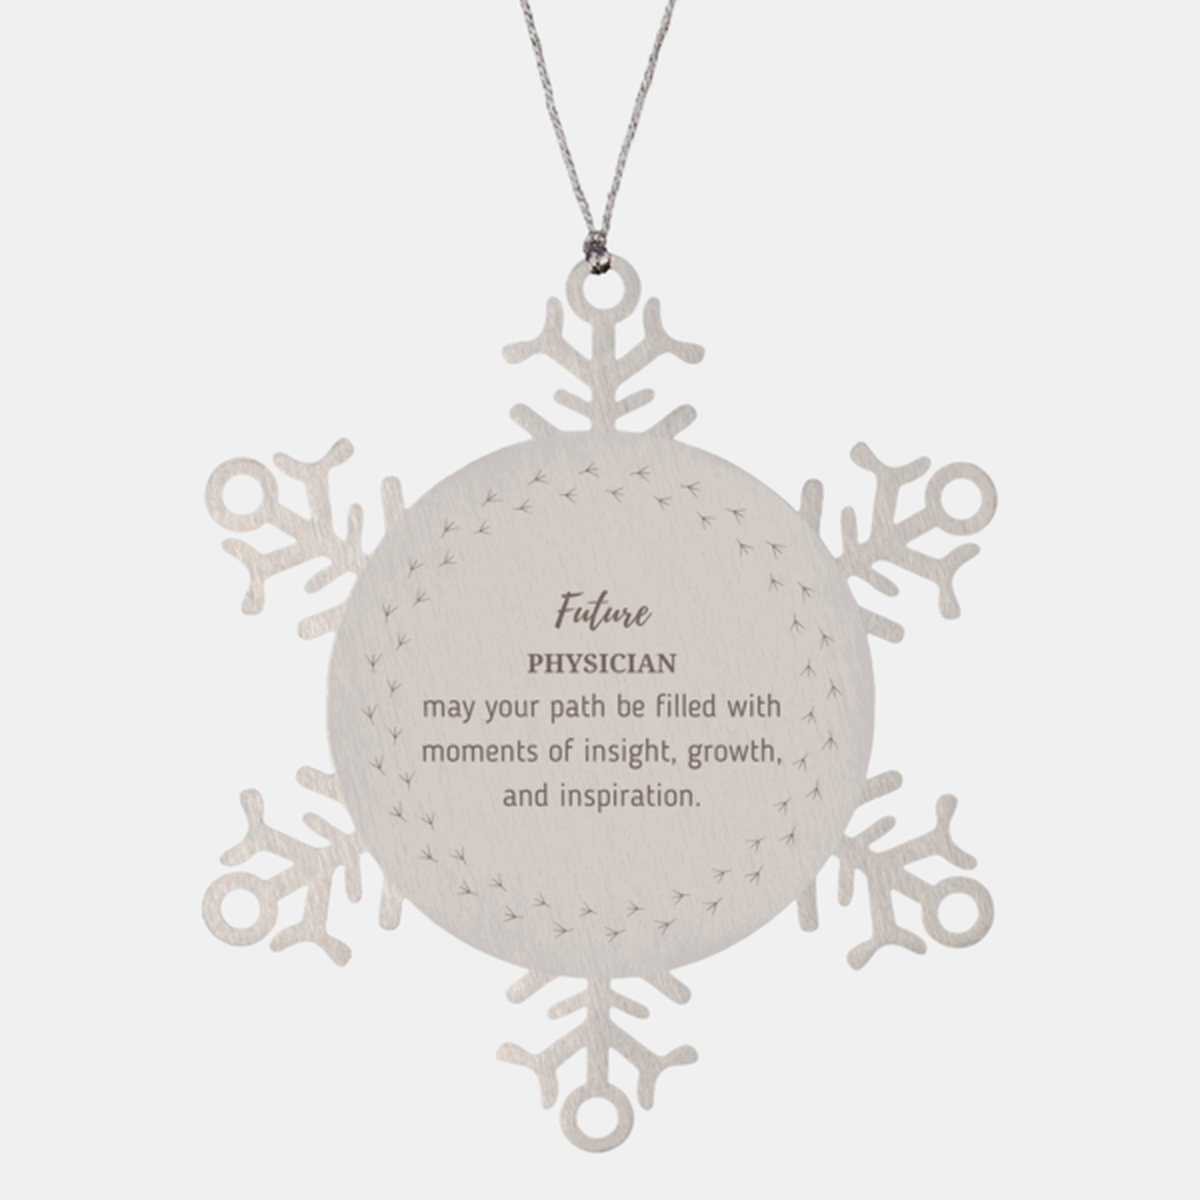 Future Physician Gifts, May your path be filled with moments of insight, Graduation Gifts for New Physician, Christmas Unique Snowflake Ornament For Men, Women, Friends